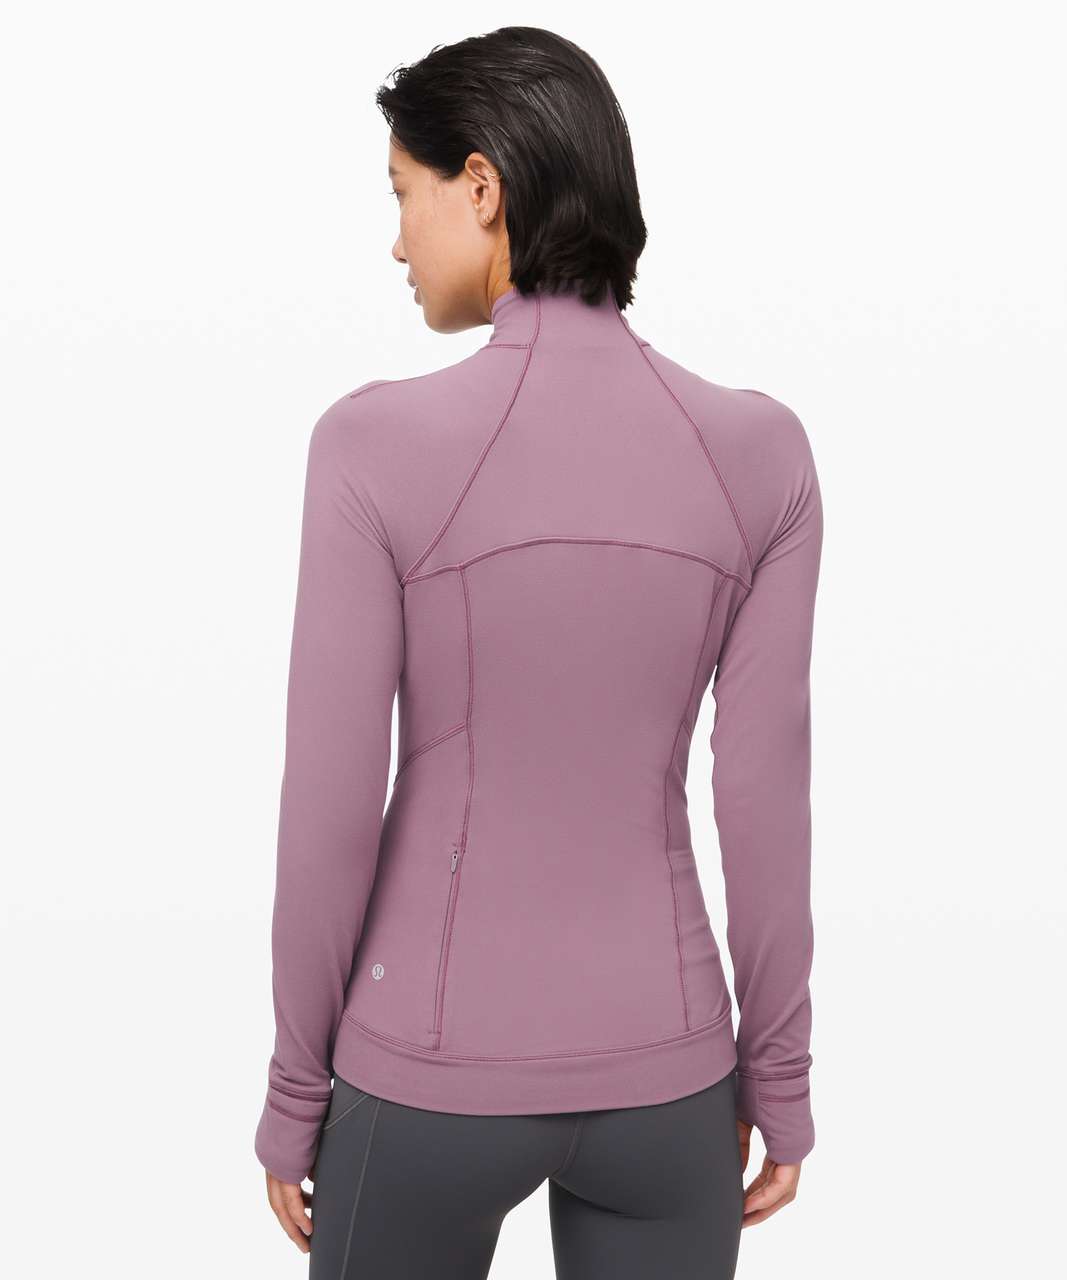 Lululemon Outrun the Elements 1/2 Zip - Frosted Mulberry